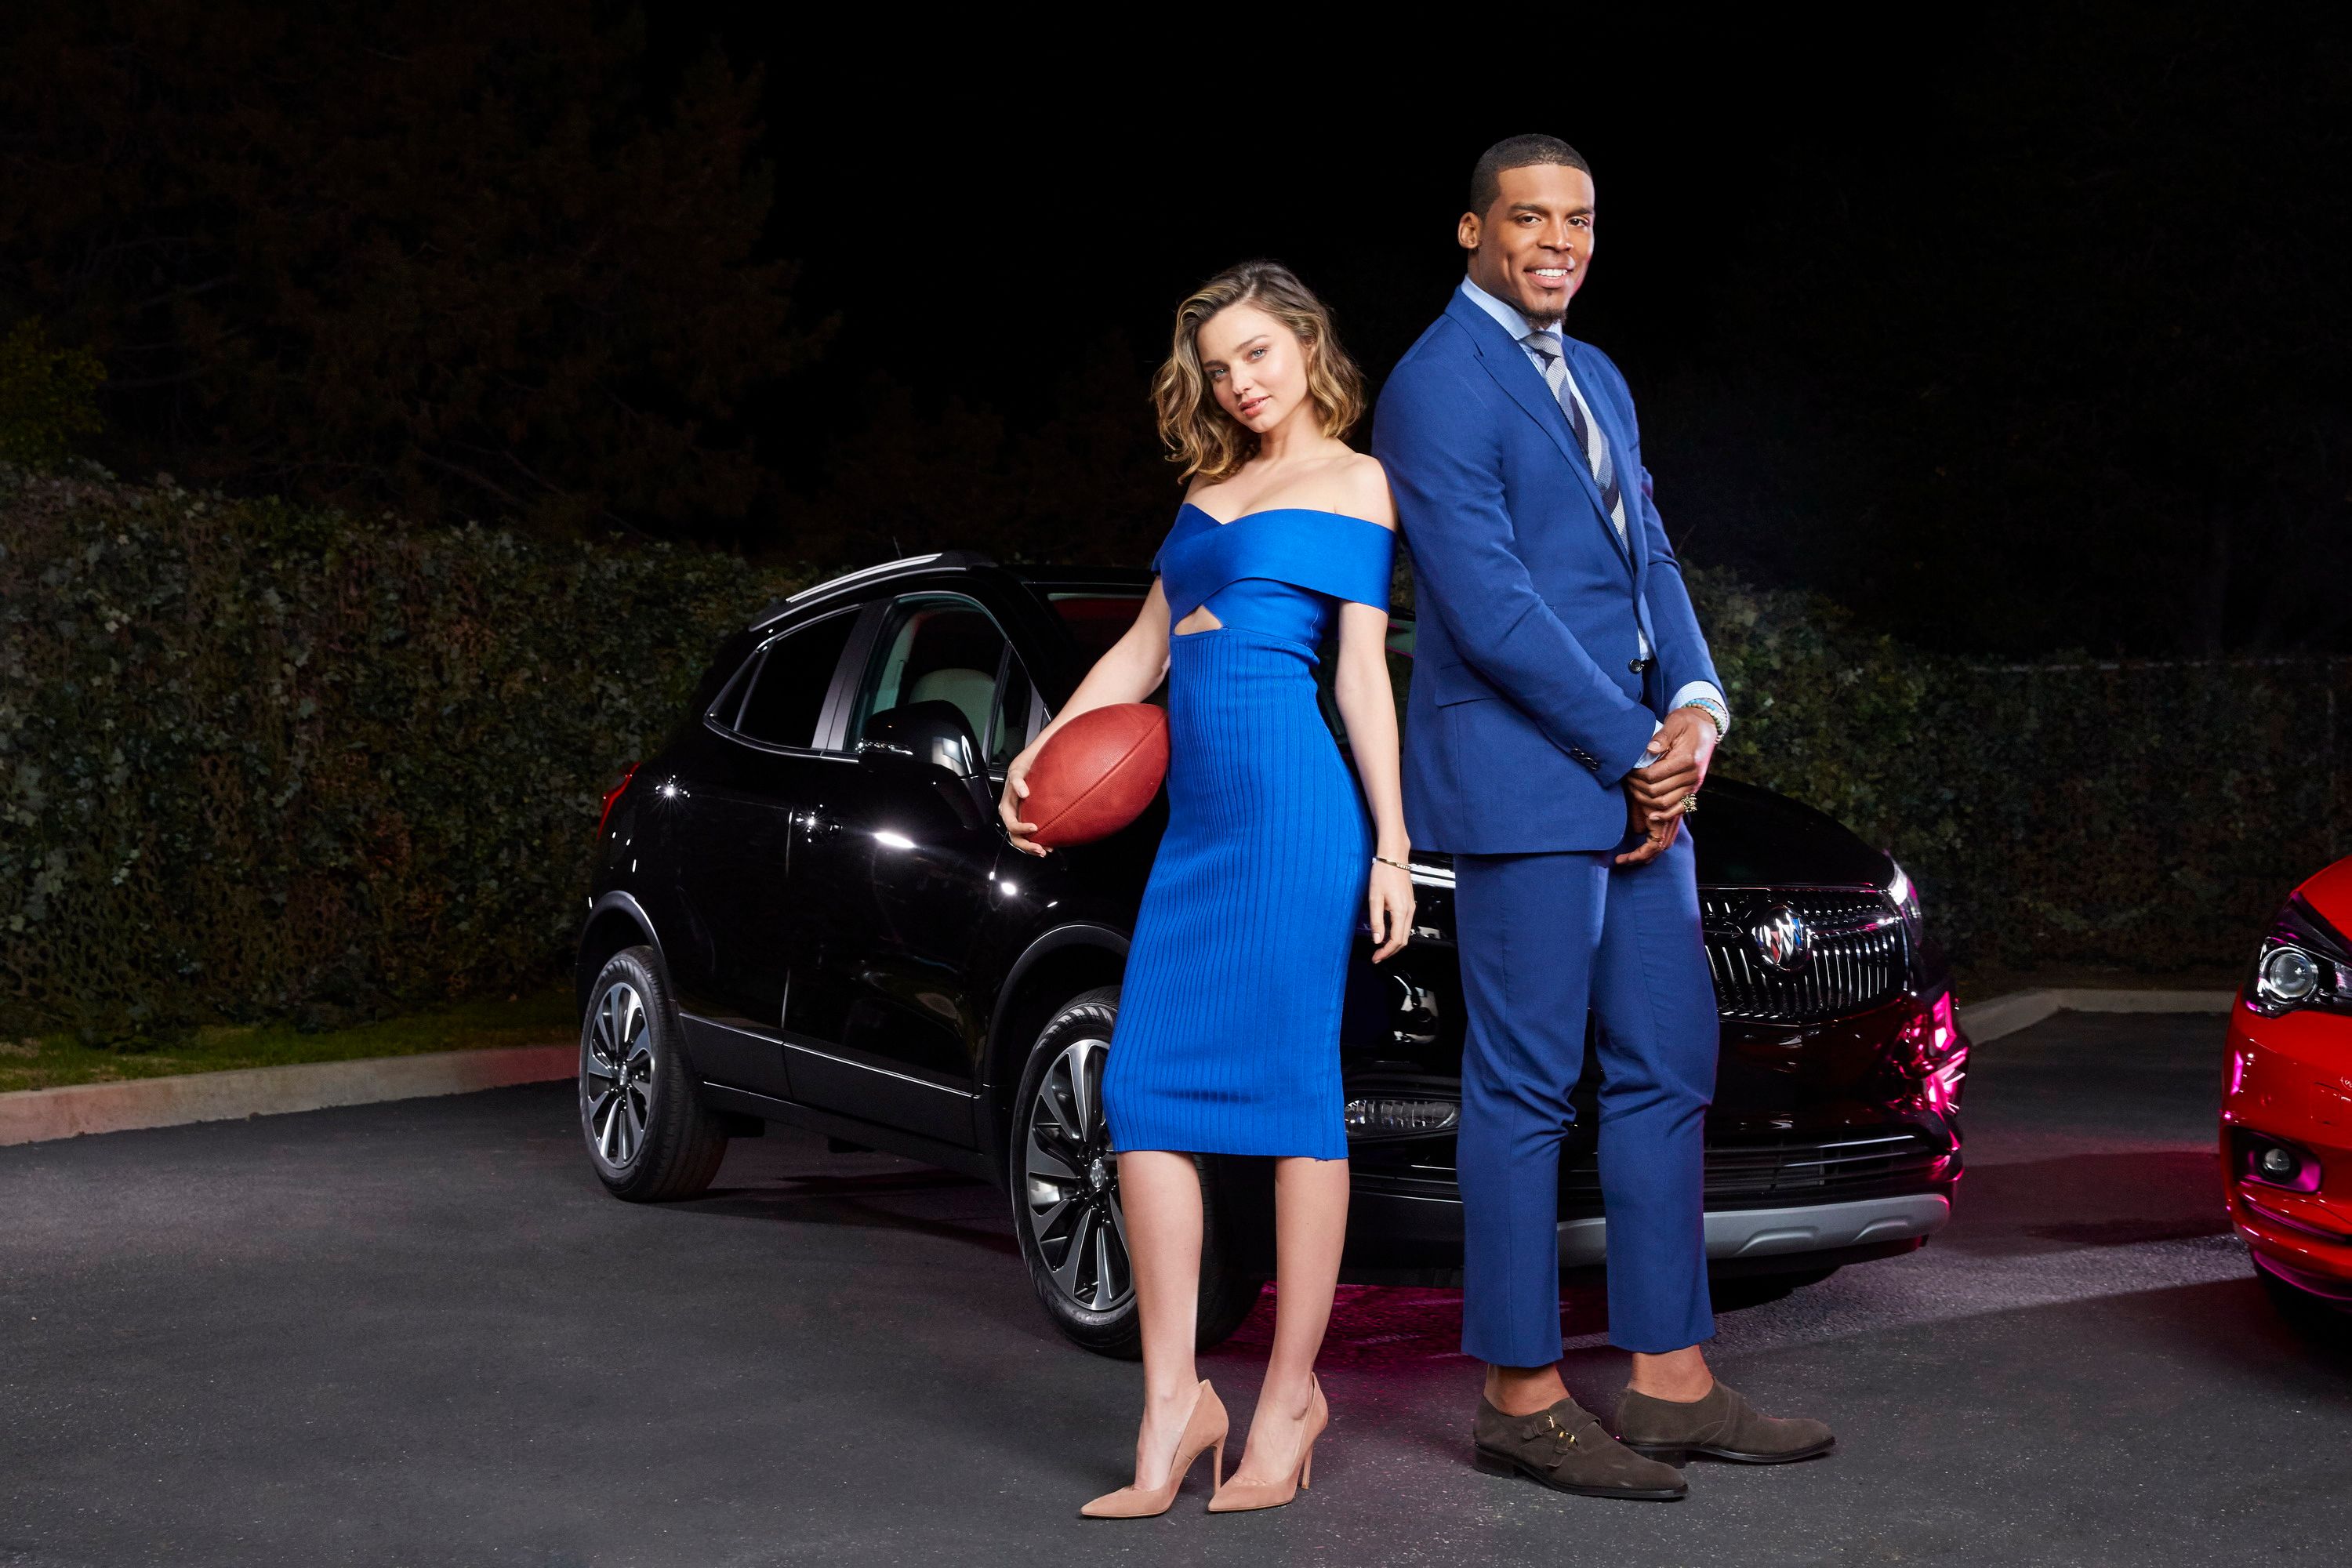 2018 Buick Goes Star-Studded Route For Its Super Bowl LI Commercial